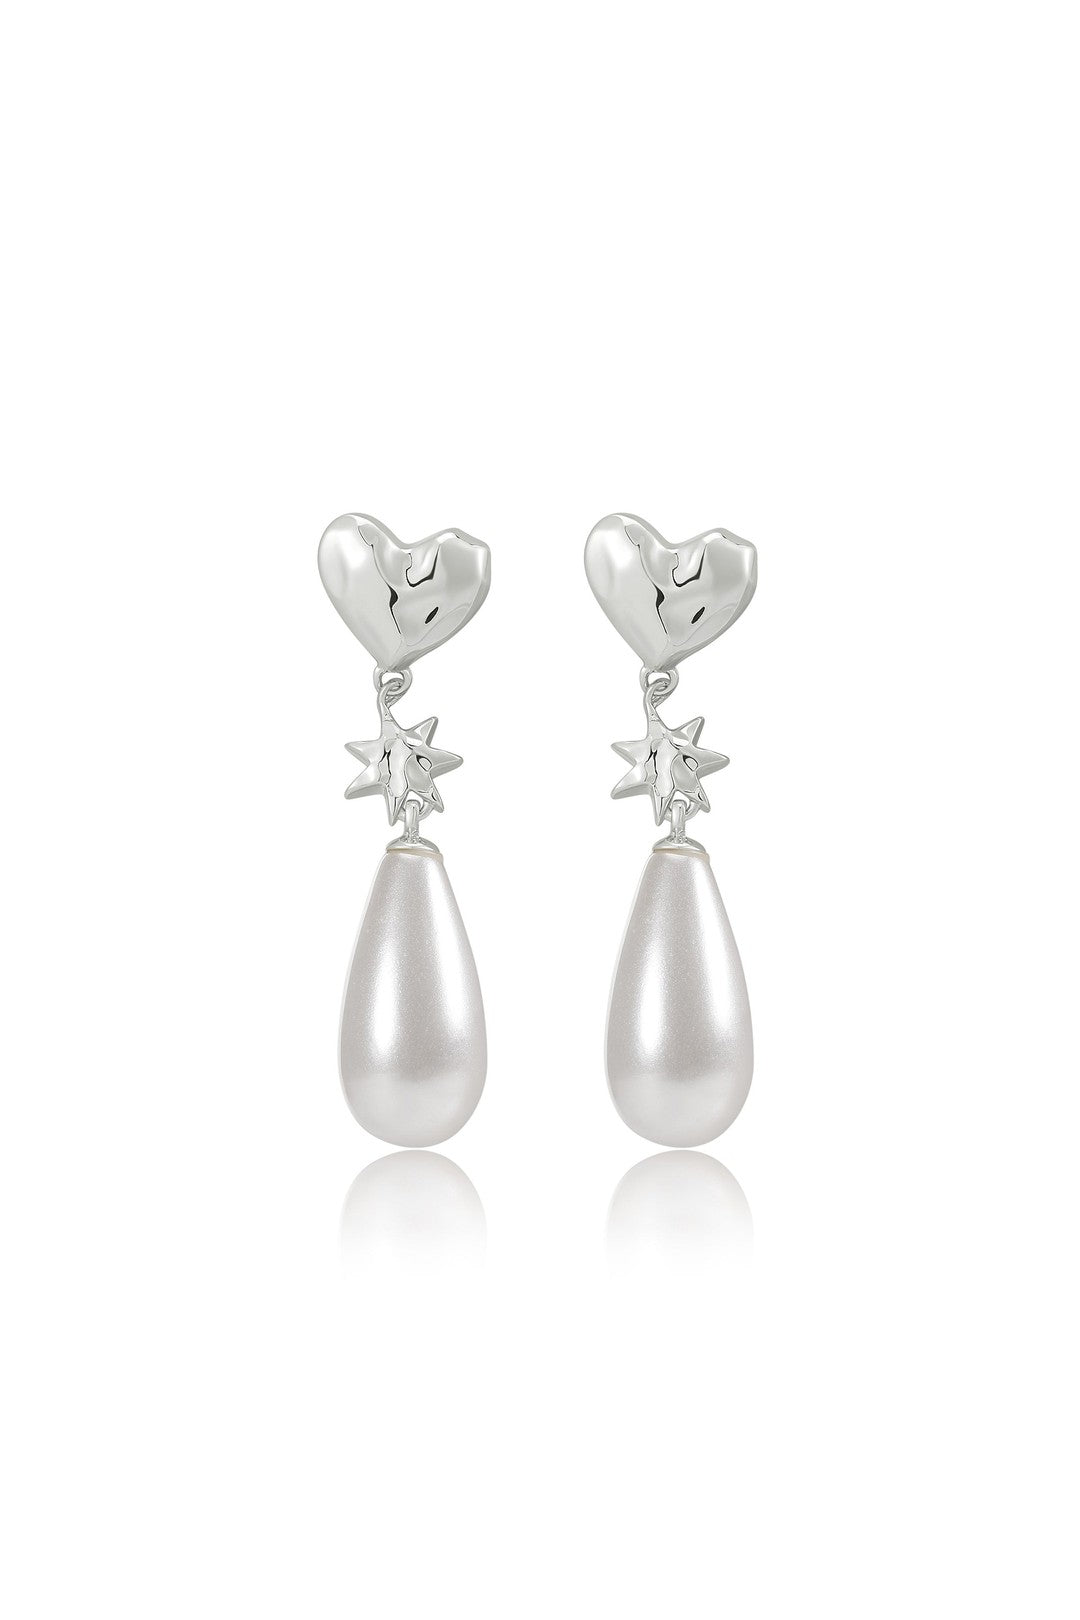 The pearl star studs, silver